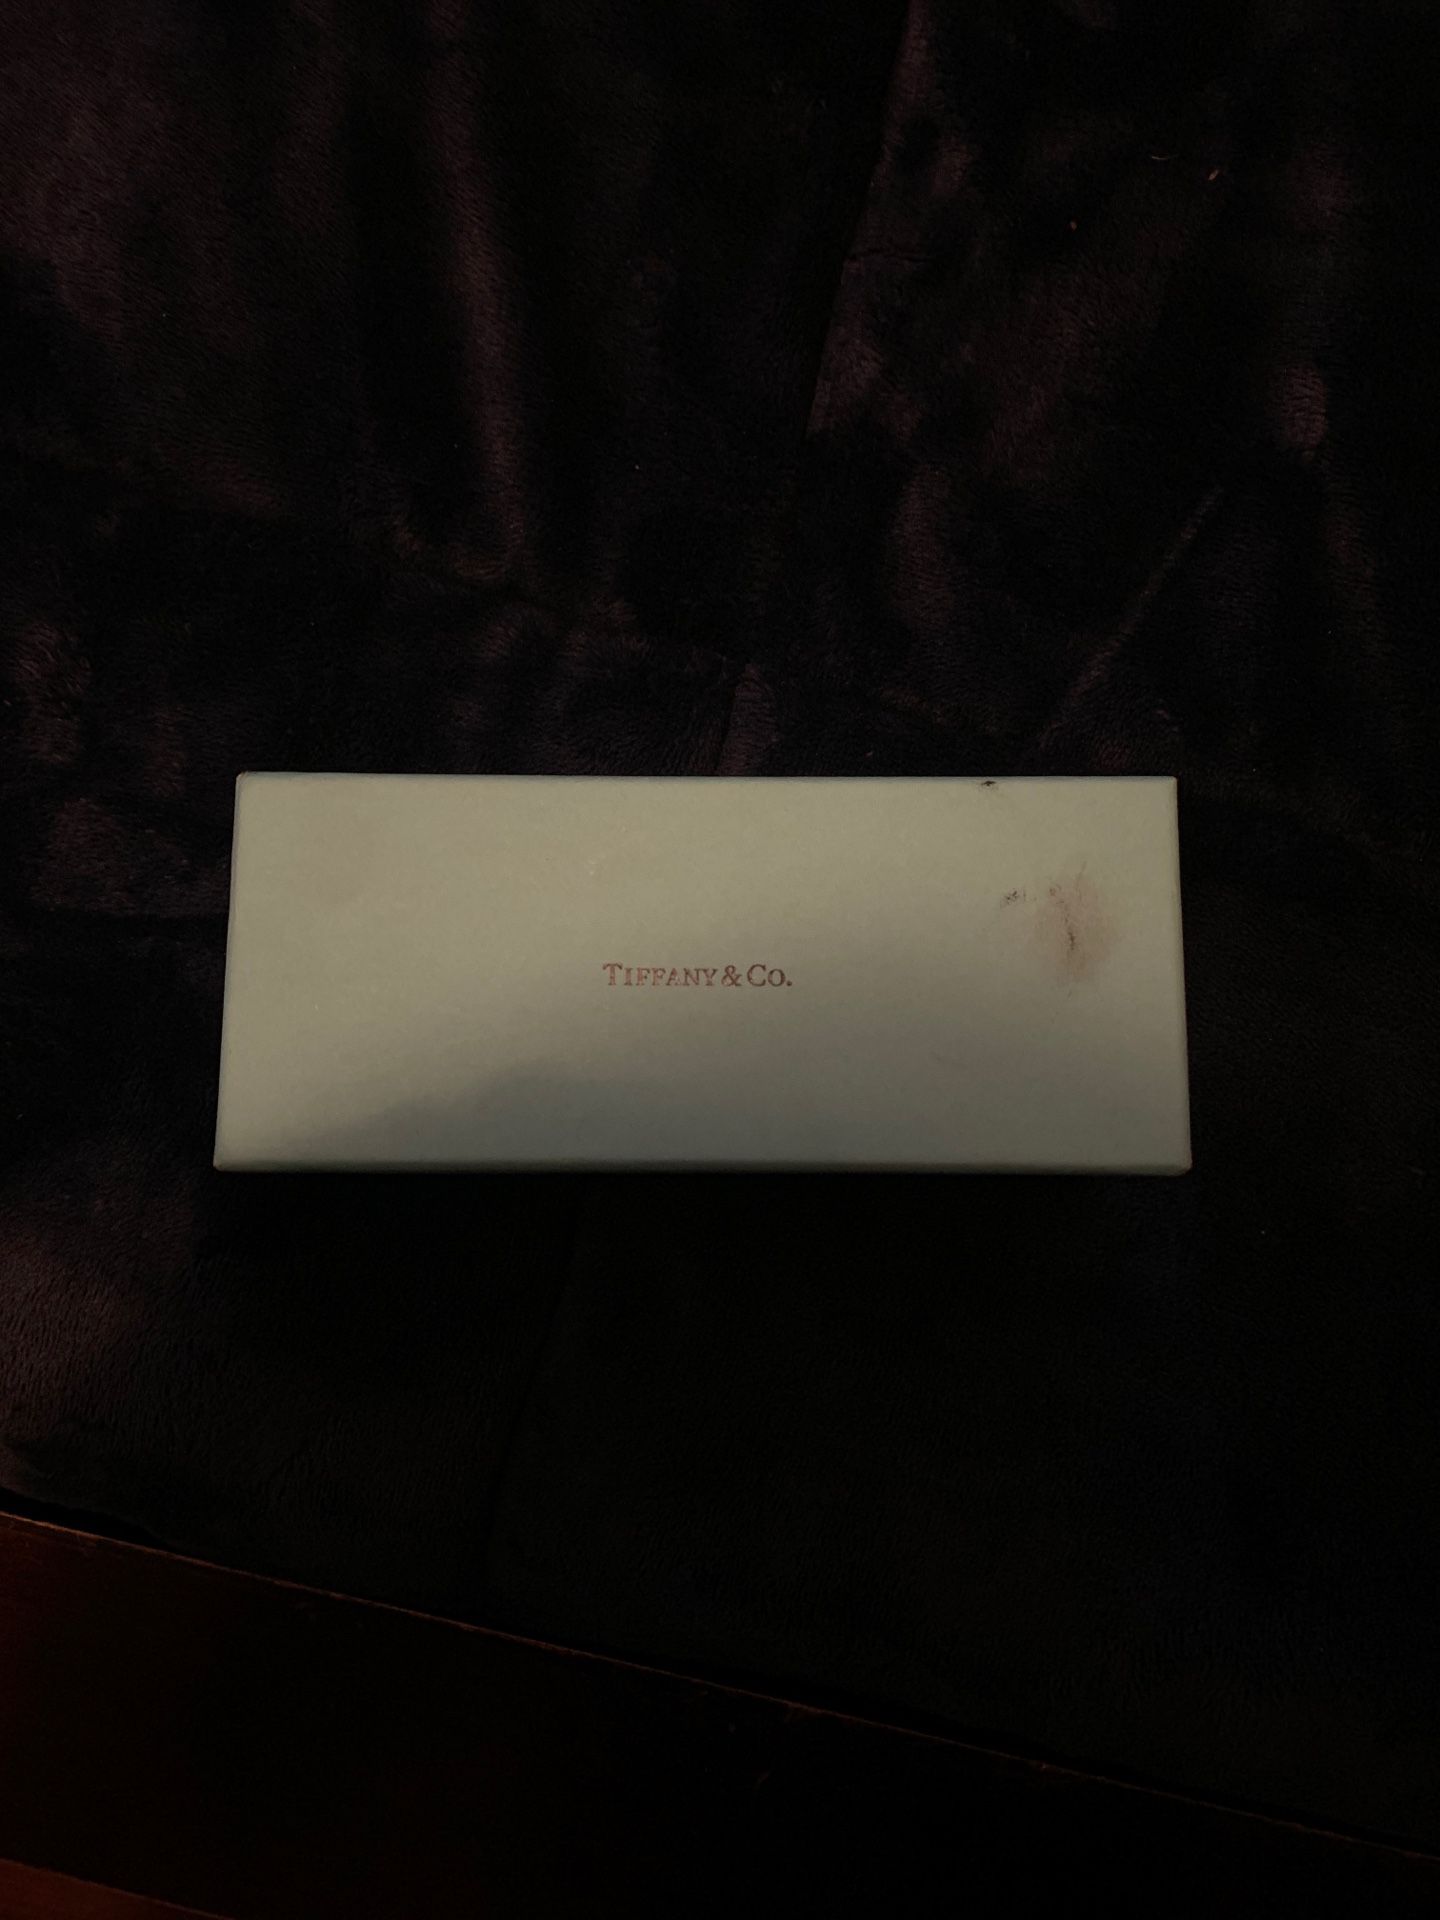 Tiffany and co glasses case with box